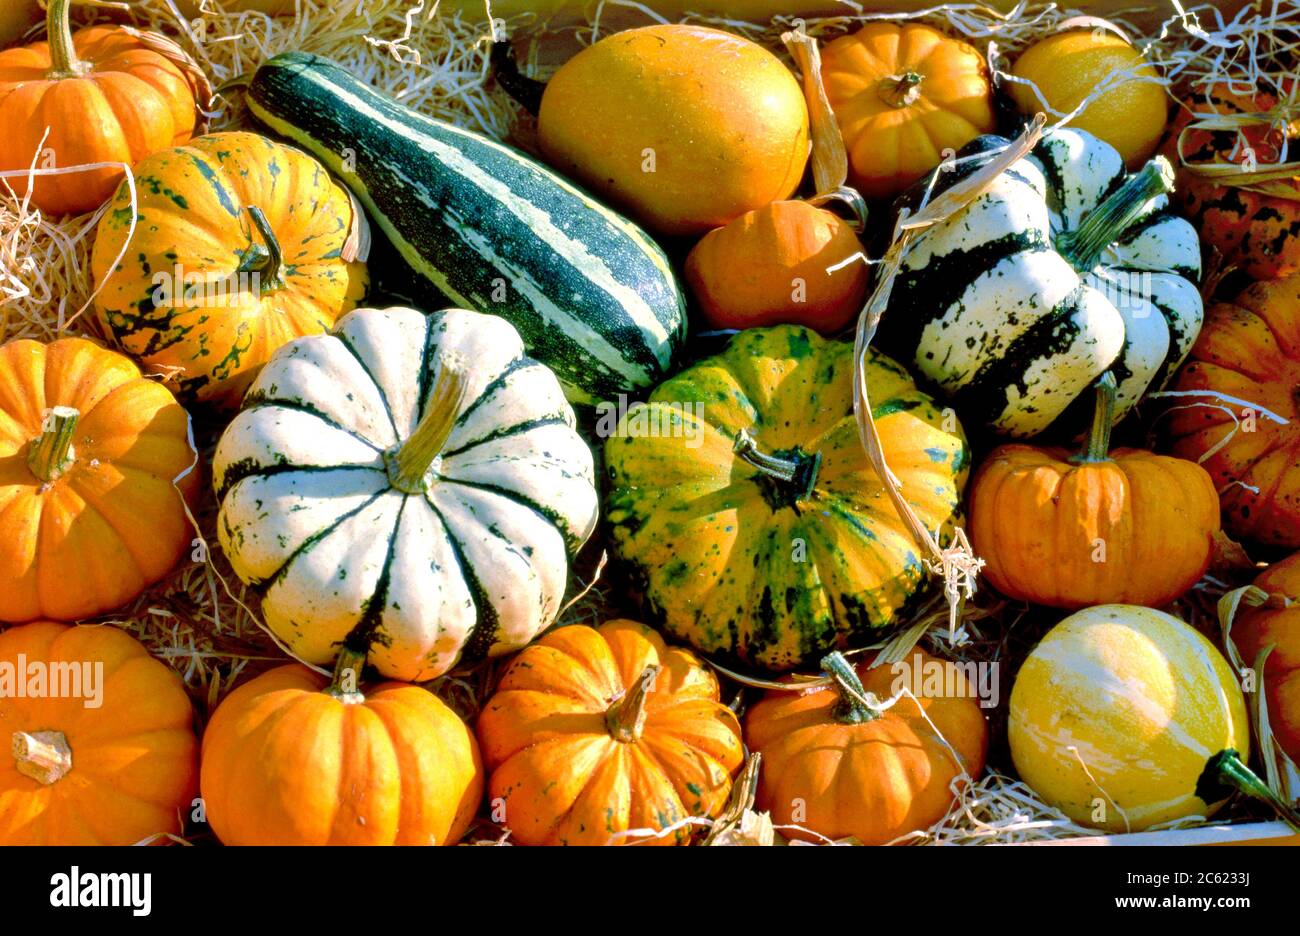 Different marrows and squashes, pumpkins, for sale at a farmers market in France Stock Photo